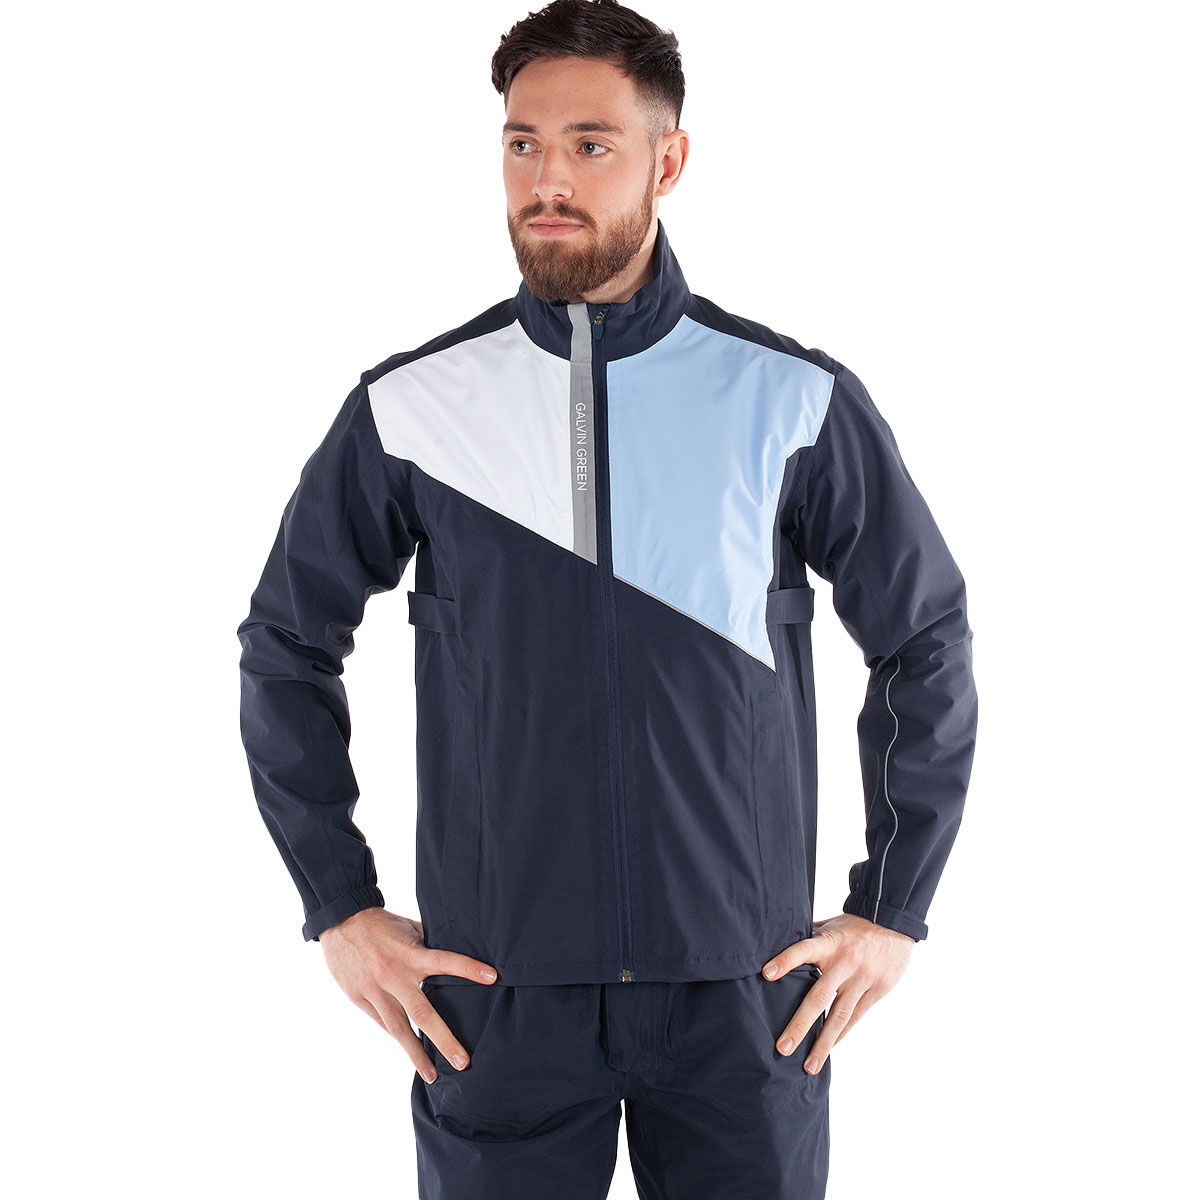 Galvin Green Mens Navy Blue and White Waterproof Apollo Golf Jacket, Size: Small | American Golf von Galvin Green